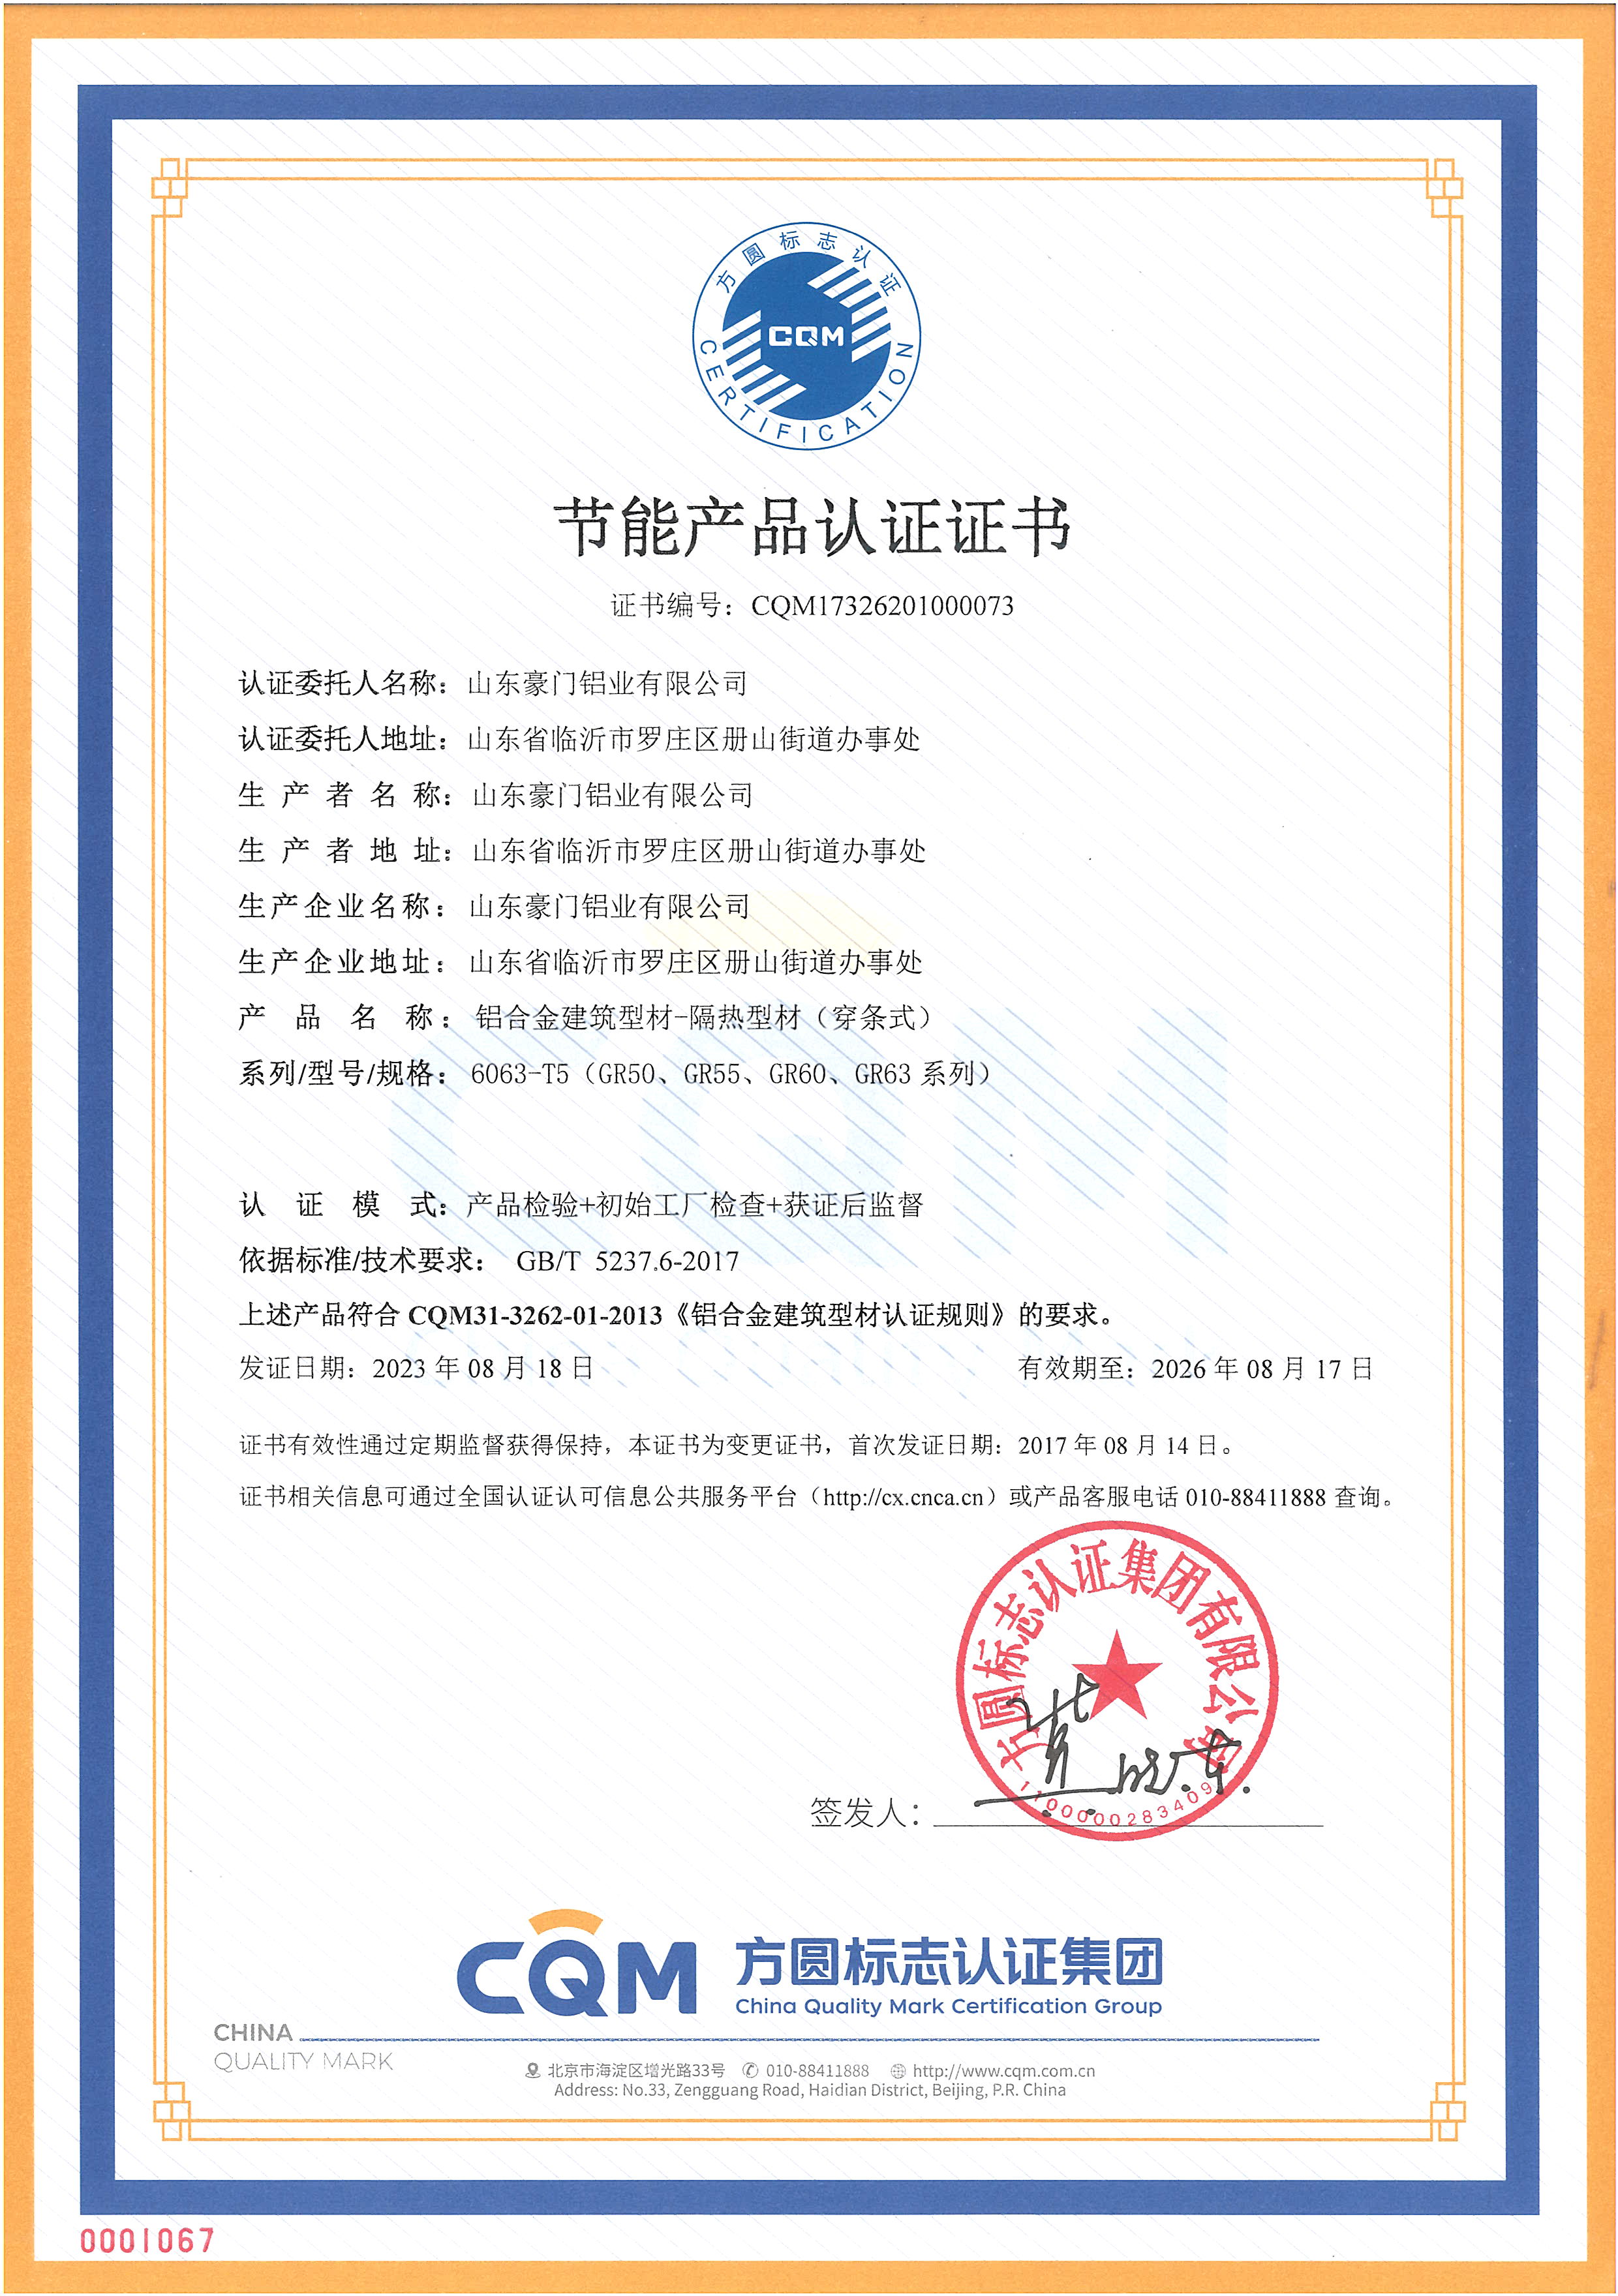 Energy saving product certification certificate